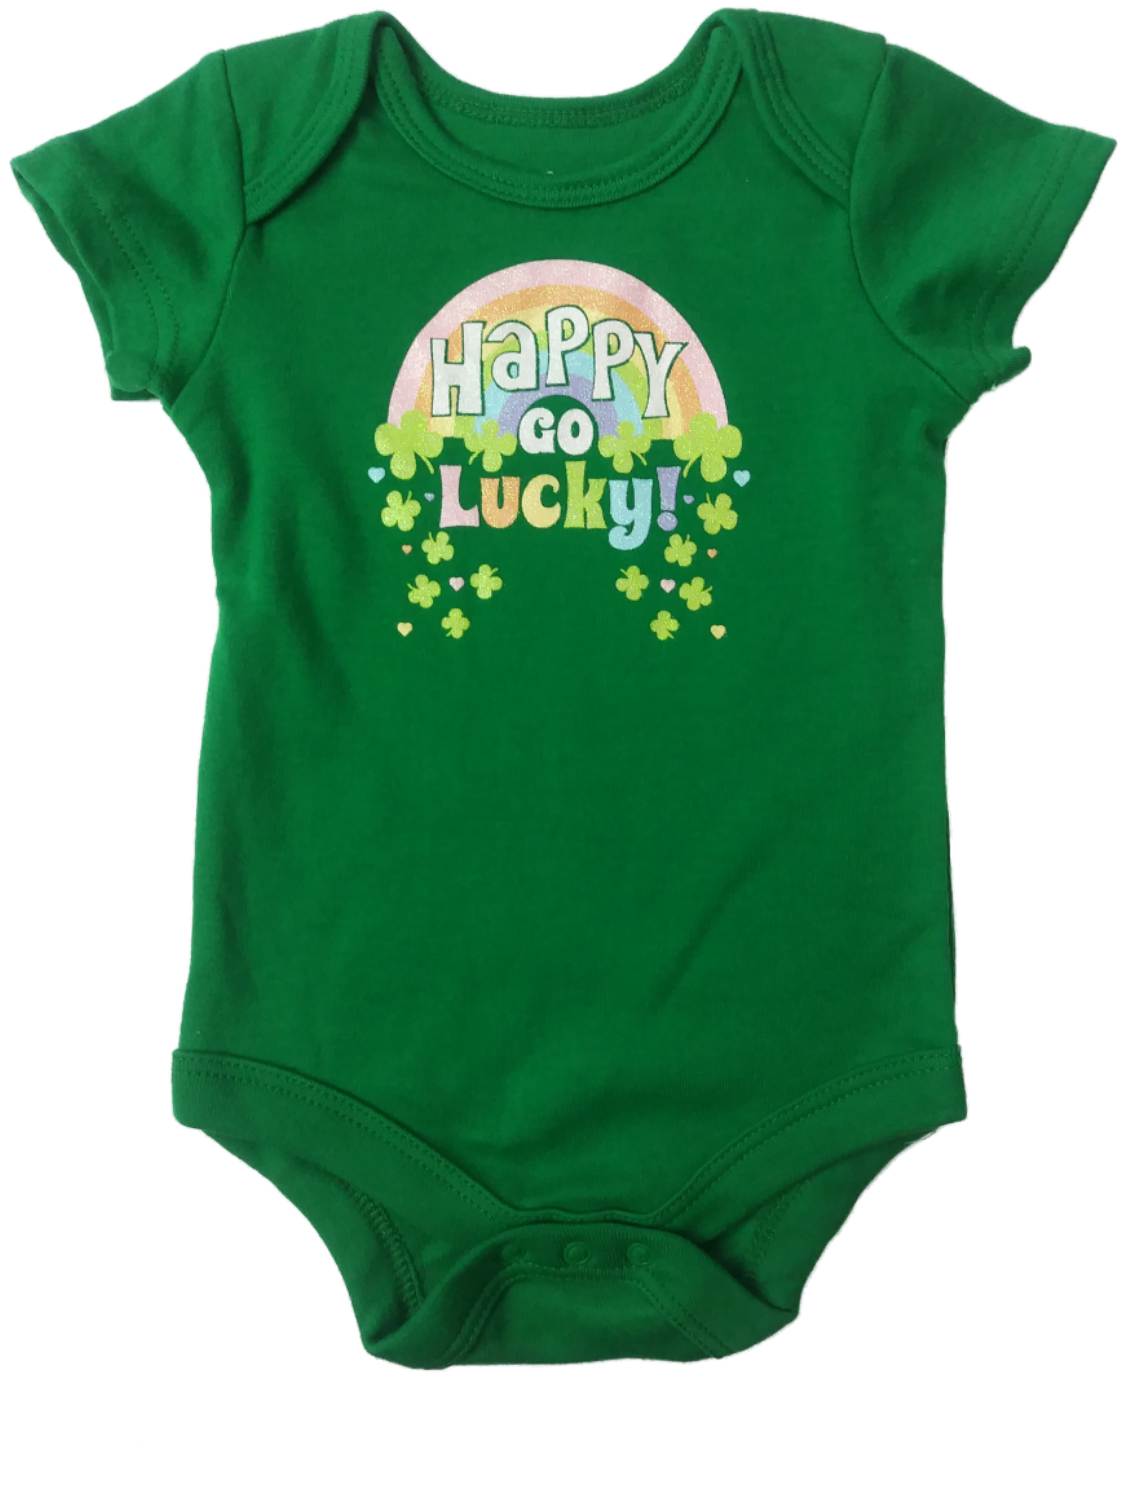 Infant St Patricks Rainbow Happy Go Lucky Single Outfit Clover Baby Bodysuit - image 1 of 1